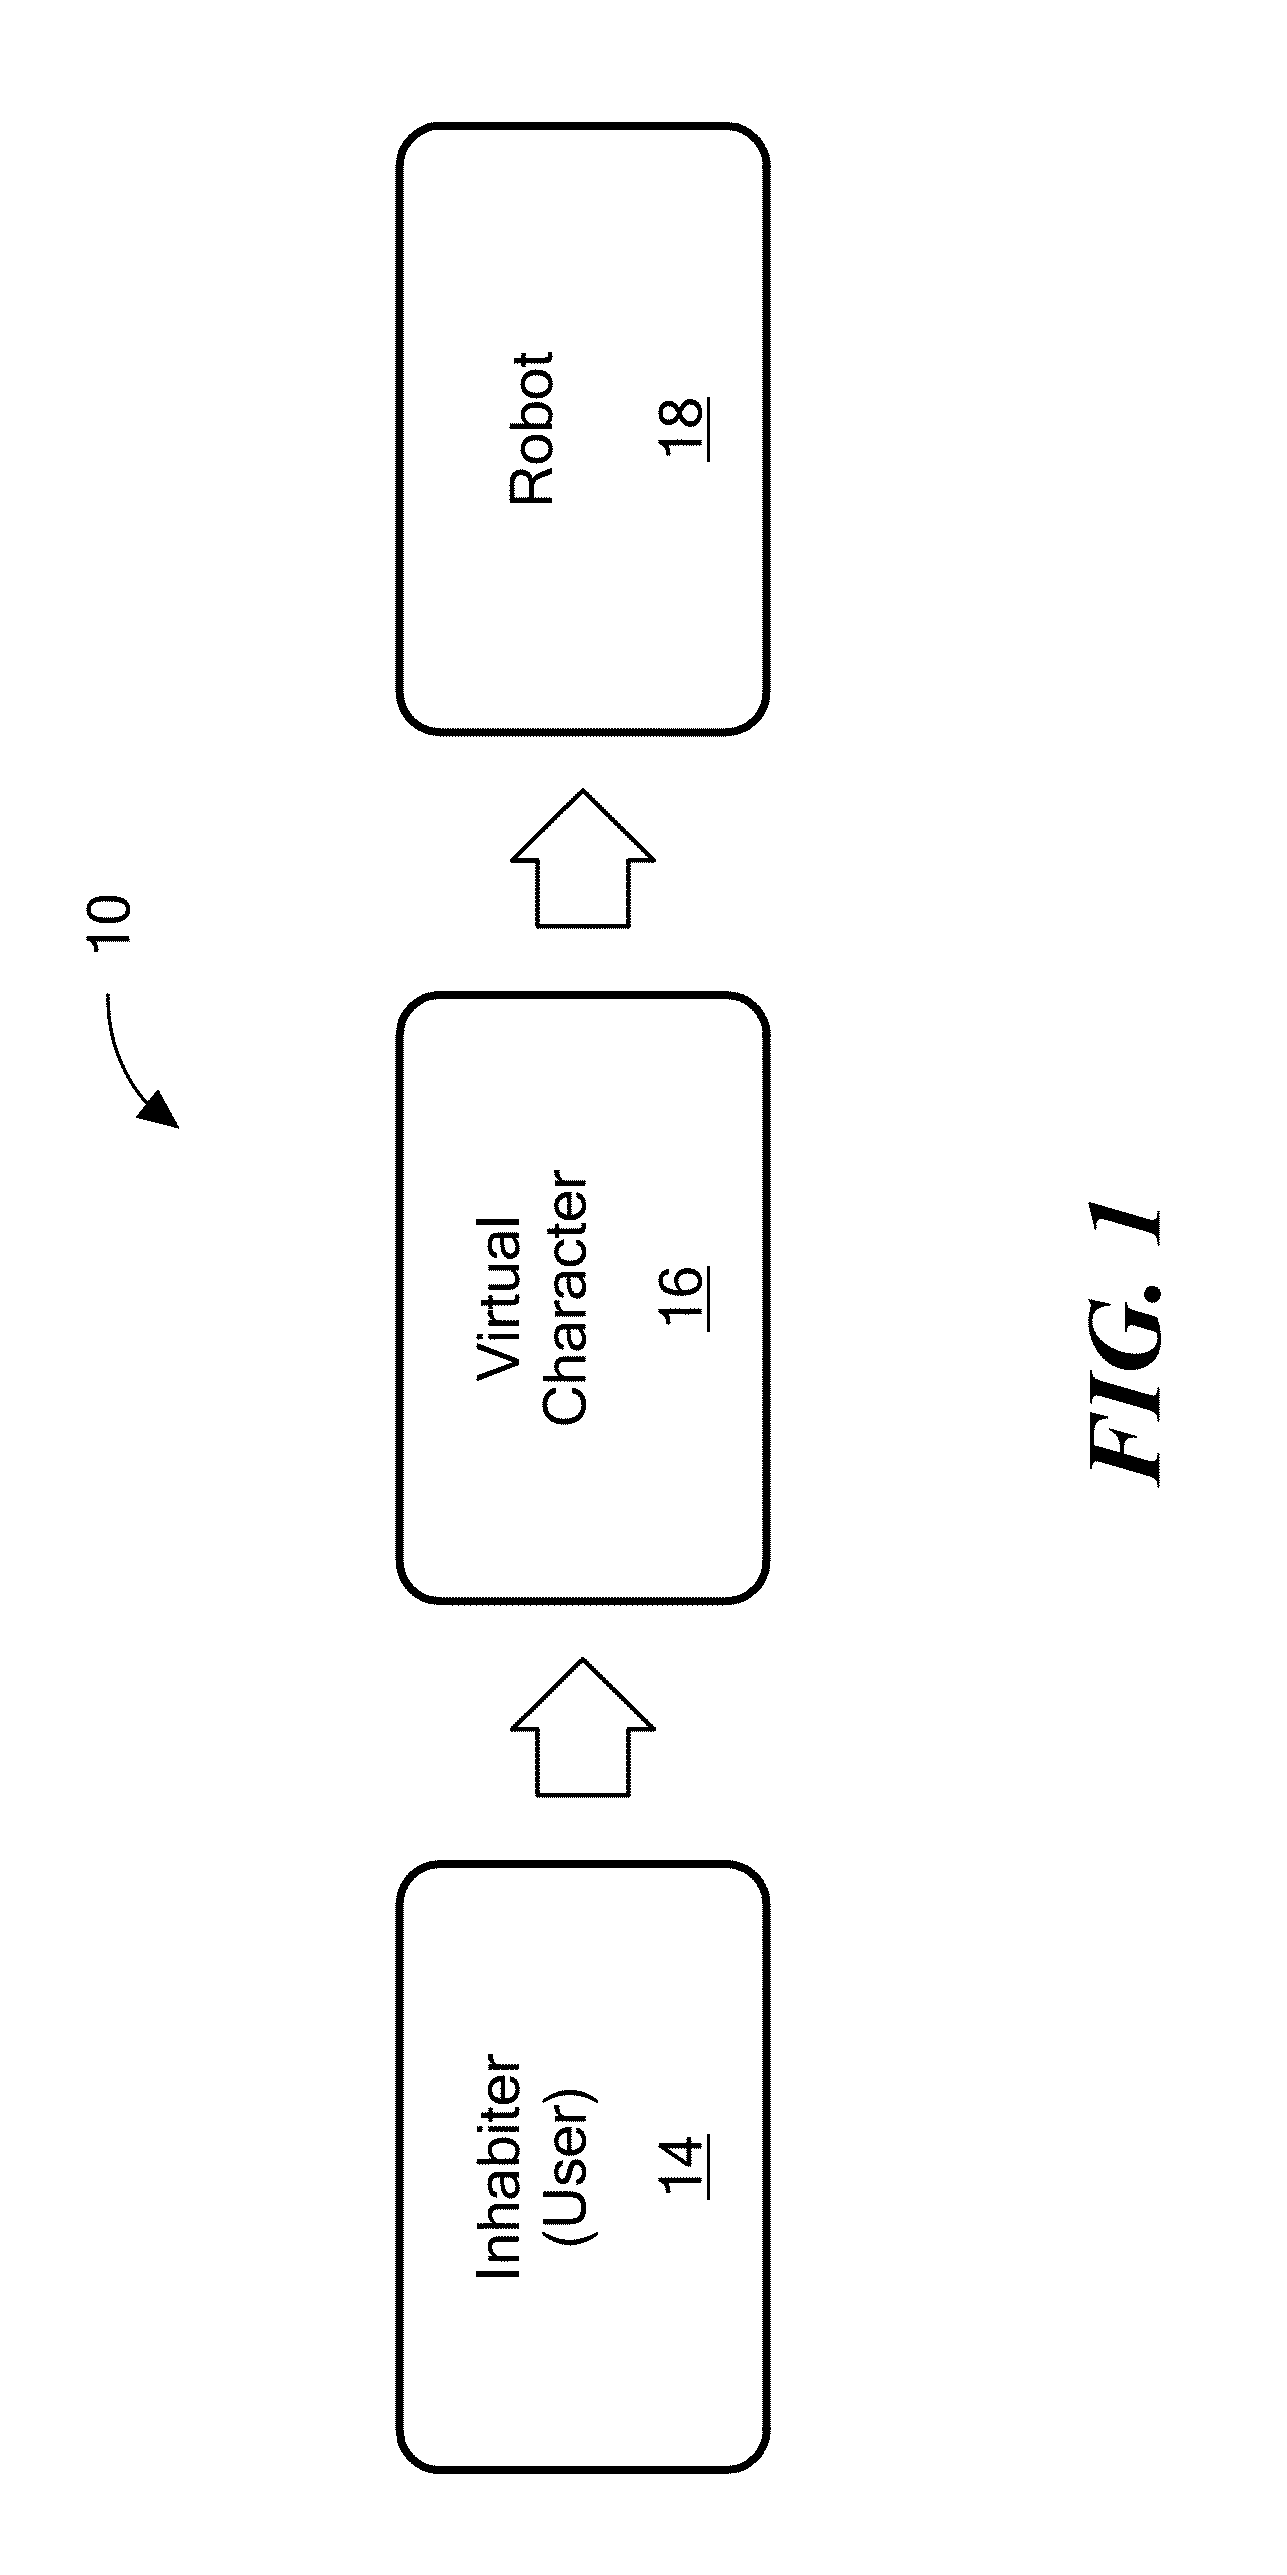 Control Interface for Robotic Humanoid Avatar System and Related Methods